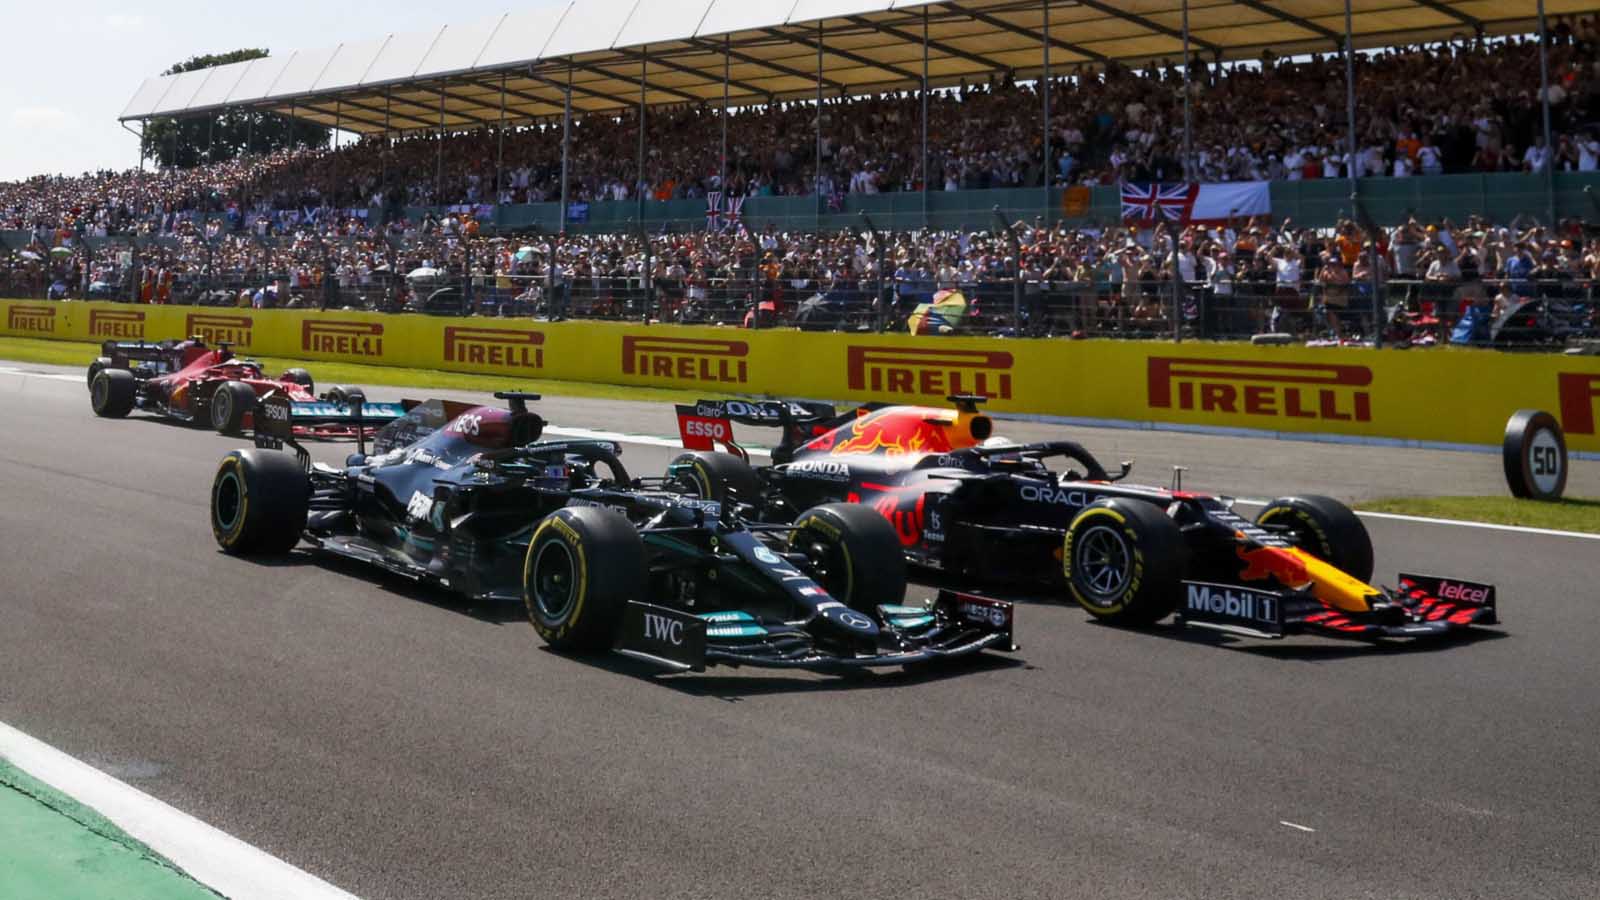 Lewis Hamilton side-by-side with Max Verstappen. Silverstone July 2021.